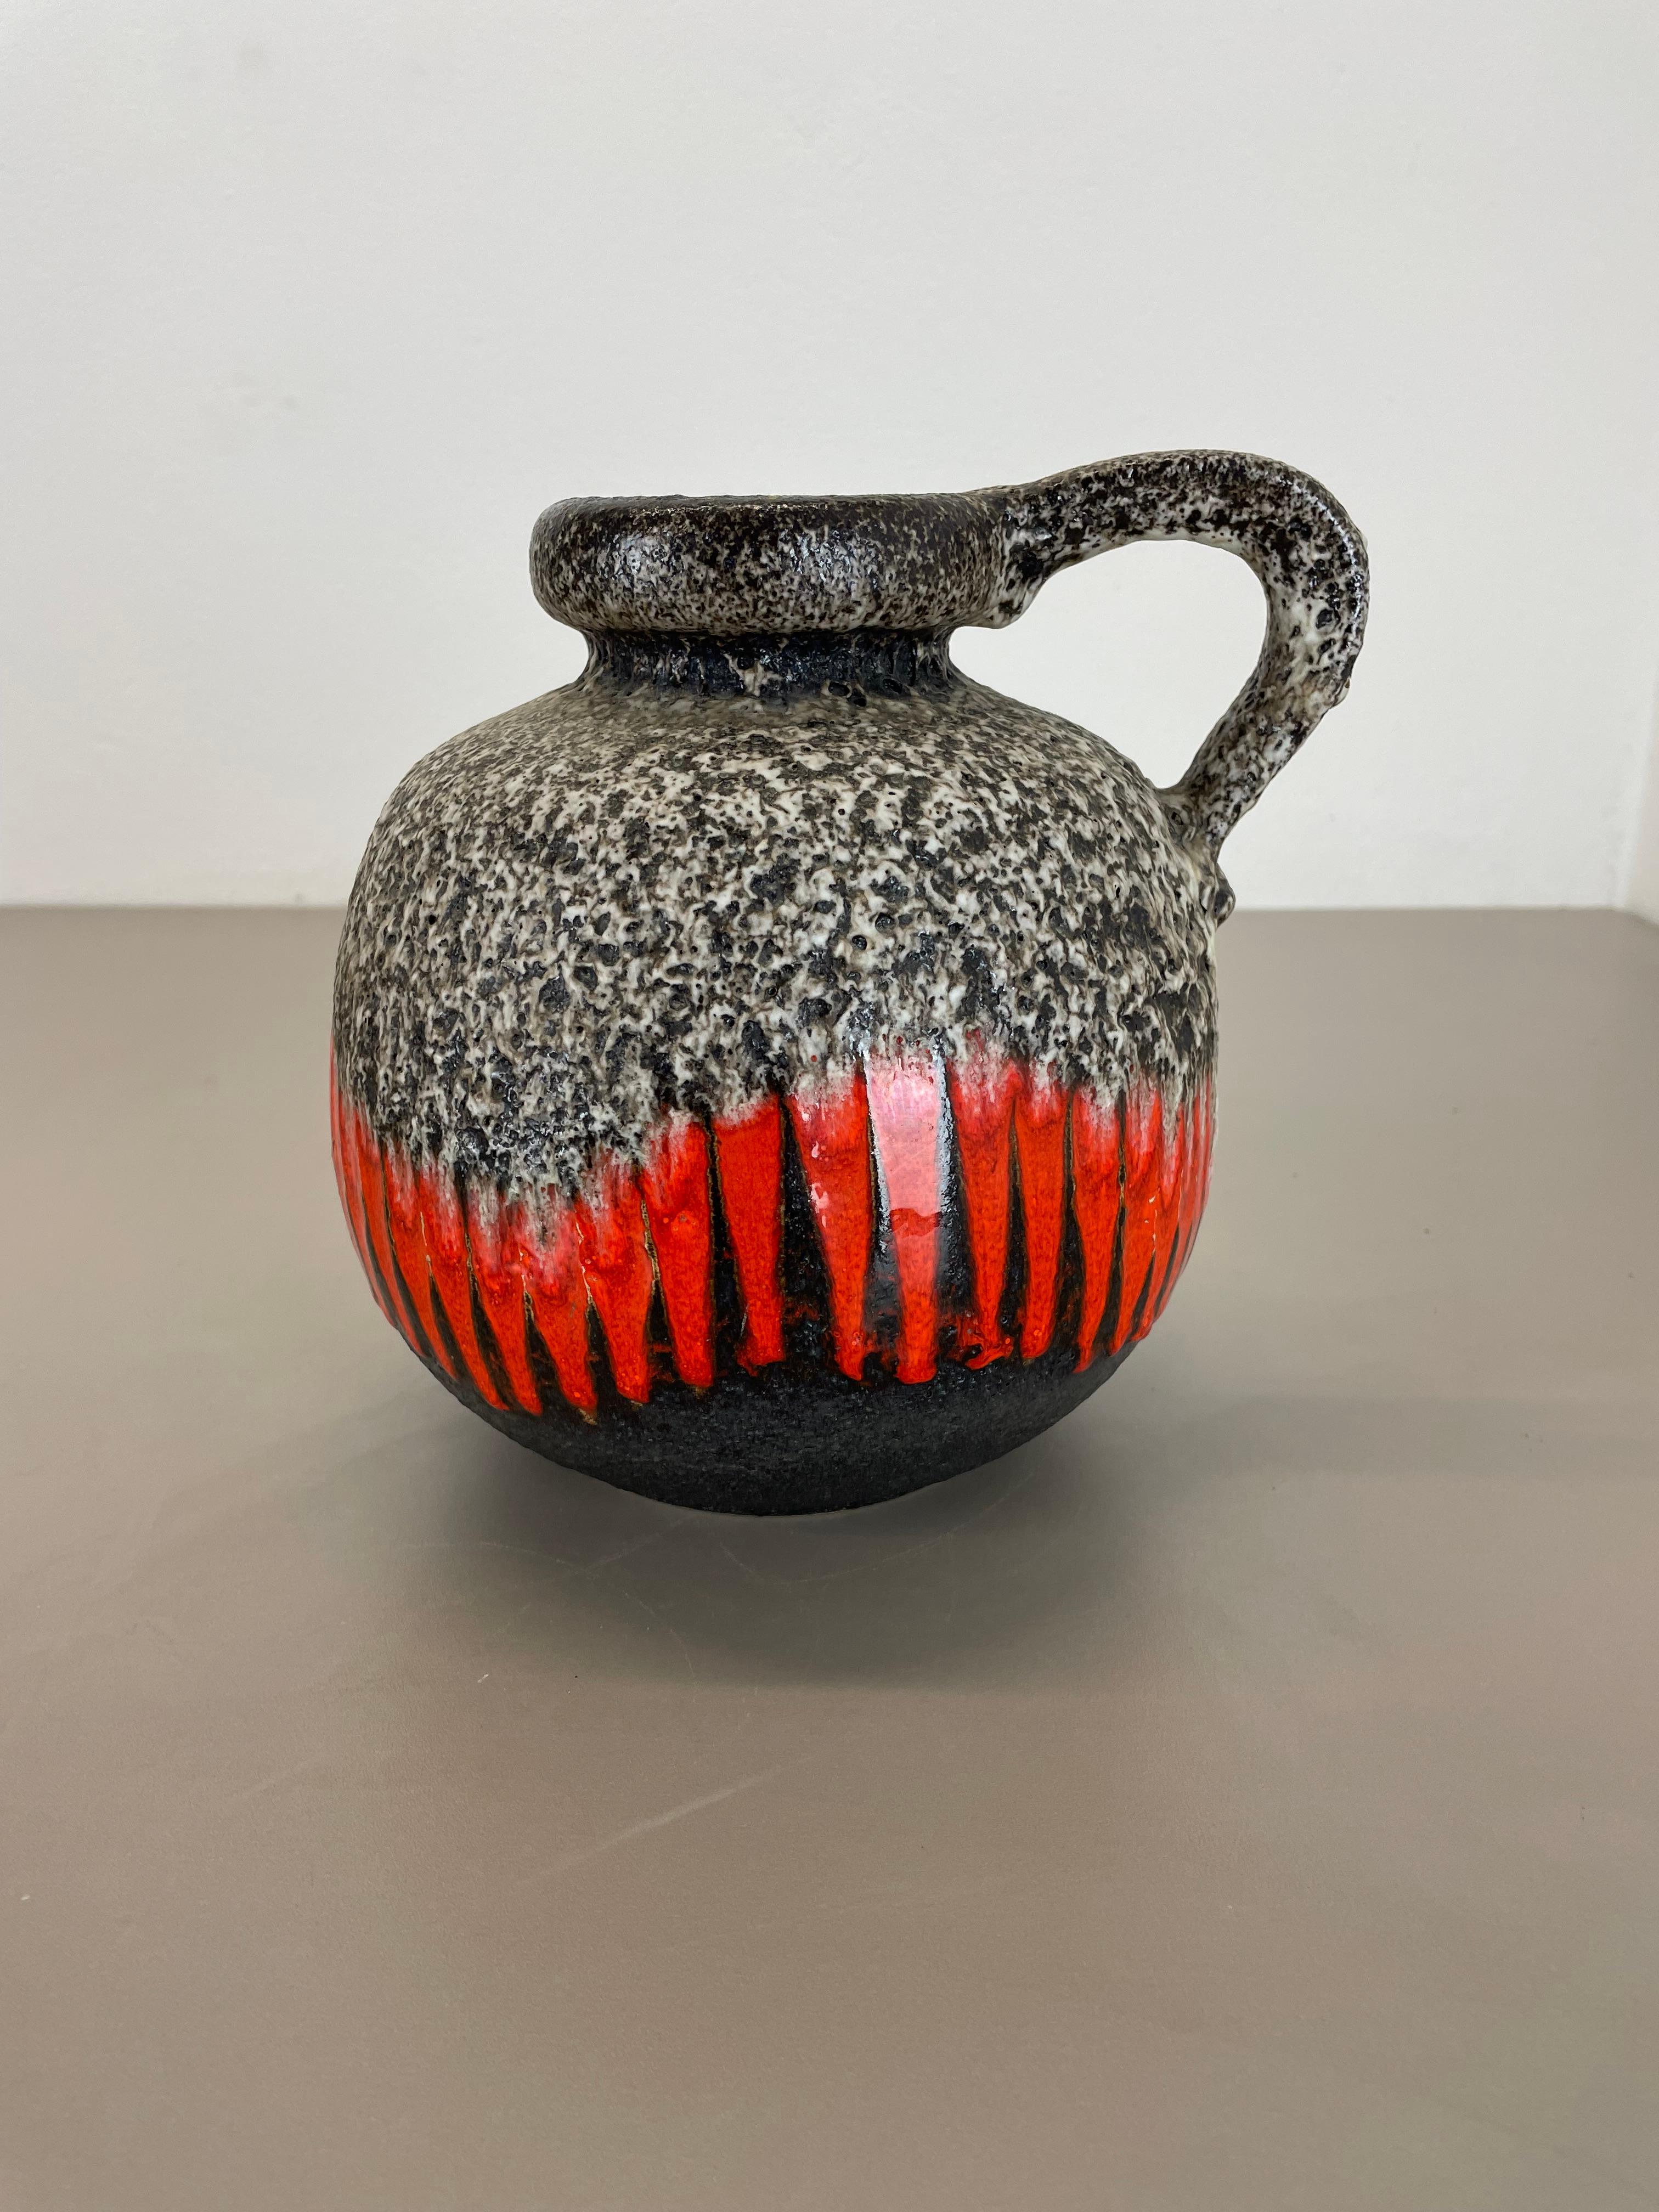 Article:

Fat lava art vase ZIG ZAG



Producer:

Scheurich, Germany



Decade:

1970s




This original vintage vase was produced in the 1970s in Germany. It is made of ceramic pottery in fat lava optic with abstract illustration in very strong